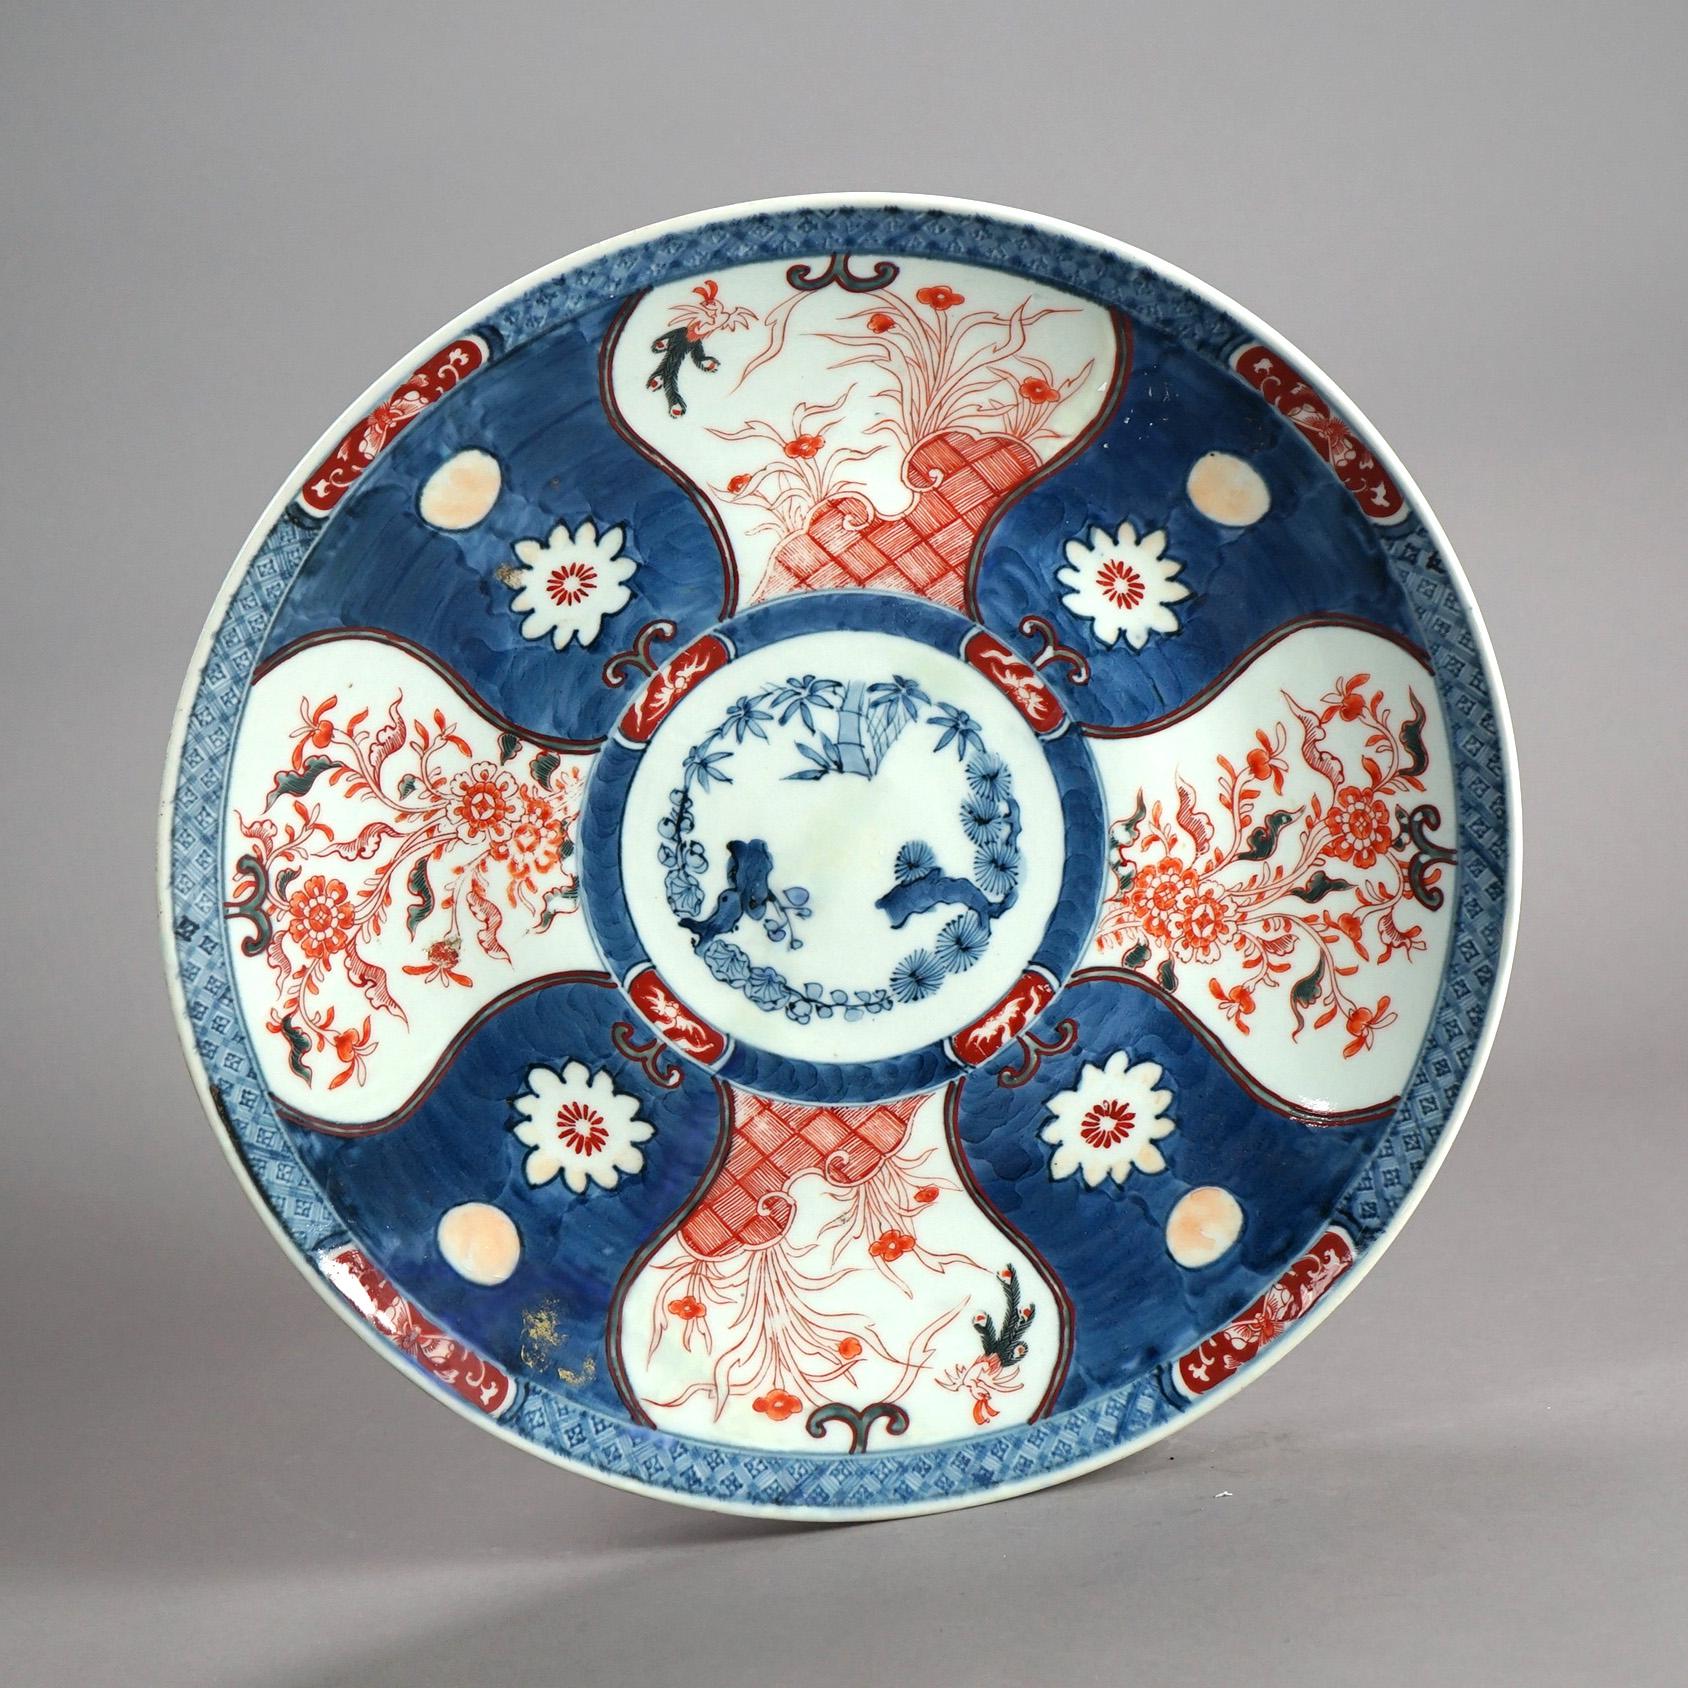 An antique Japanese Imari charger offers porcelain construction with hand painted garden reserves and en verso floral pattern with central maker stamp, c1920

Measures- 2.25''H x 18.5''W x 18.5''D